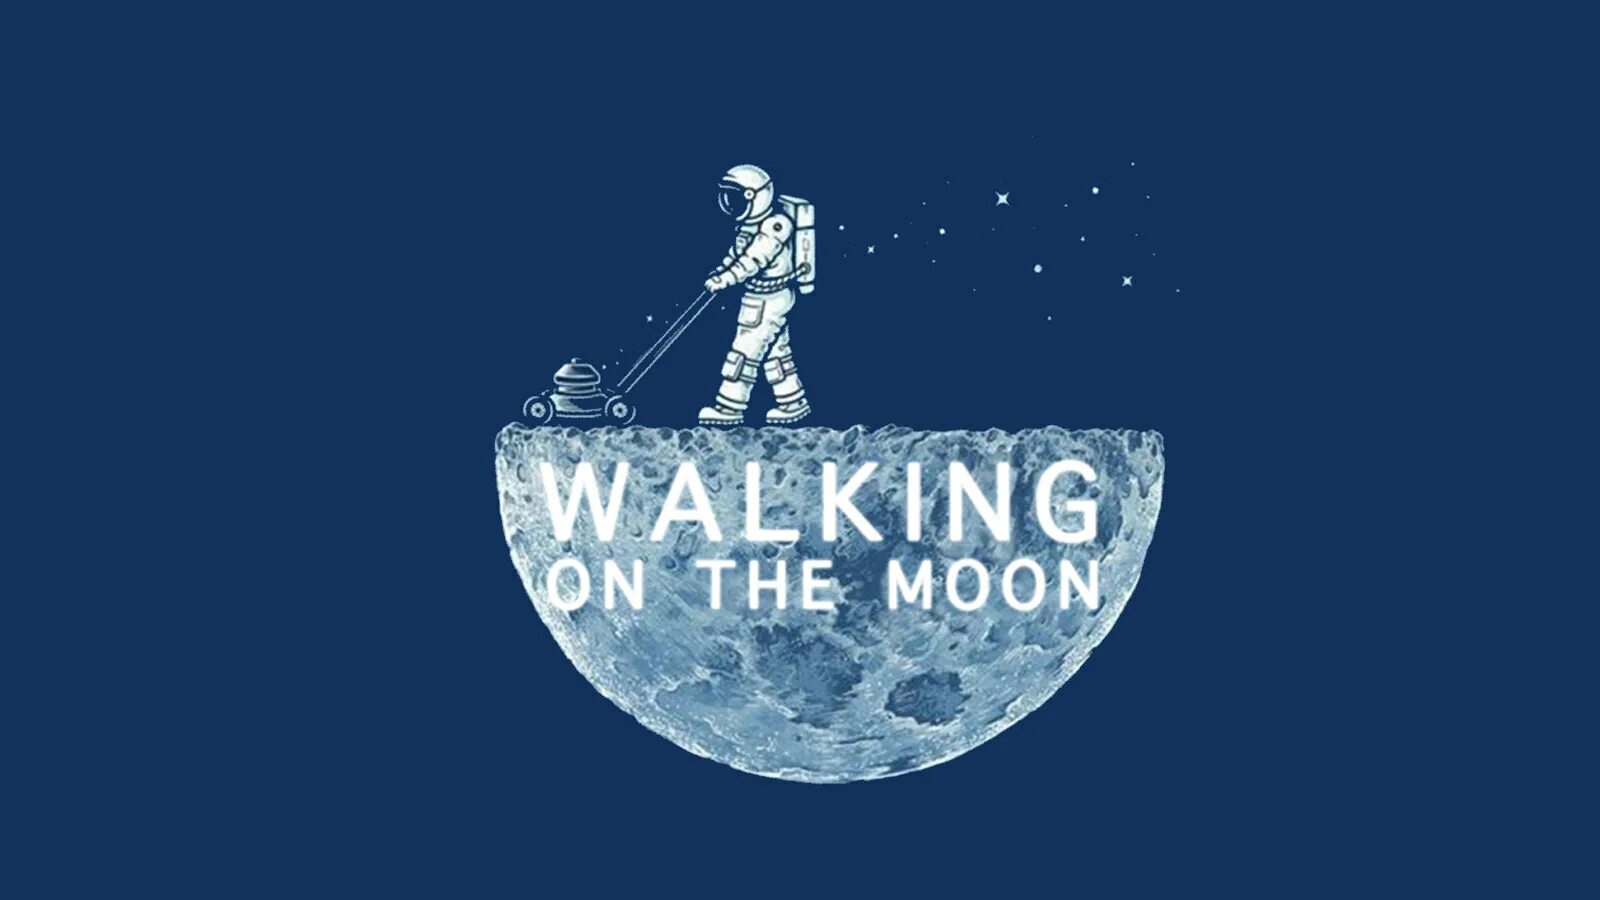 Walking on the moon. To the Moon логотип. Moon надпись. To the Moon надпись.